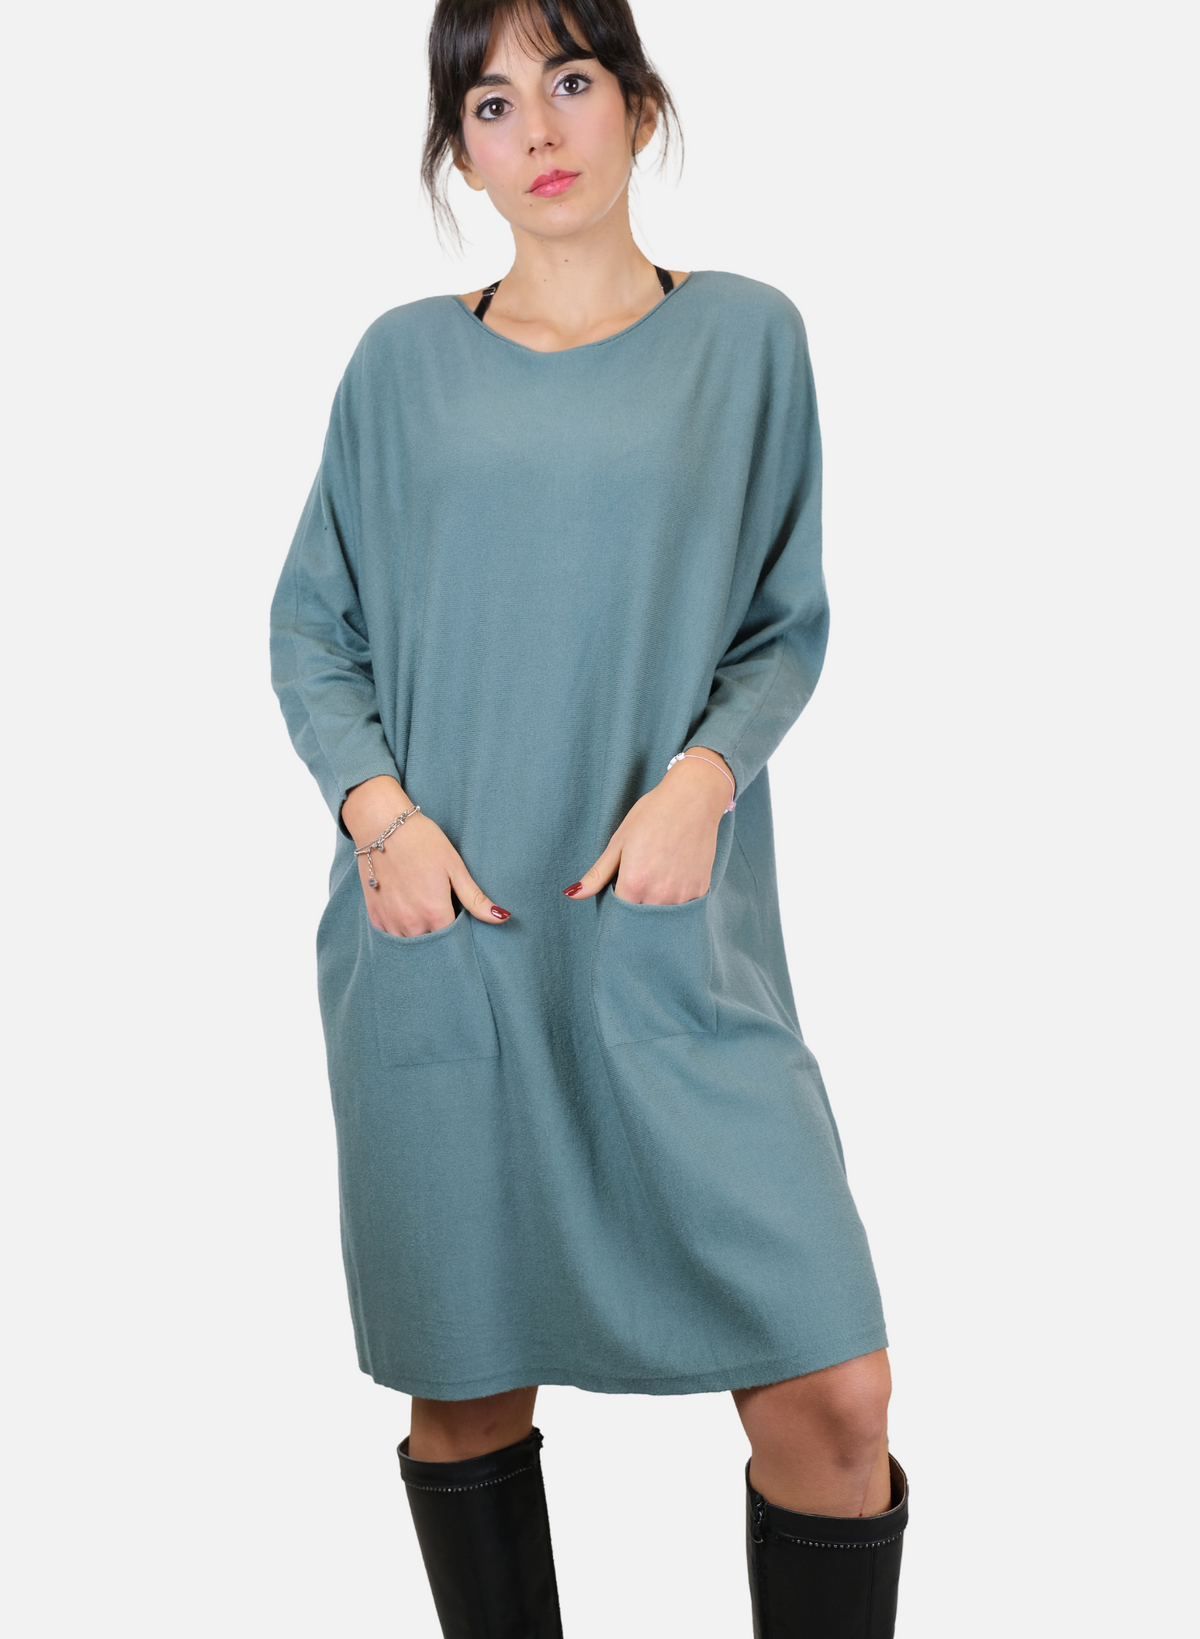 Maxi long -sleeved women's shirt with front pockets